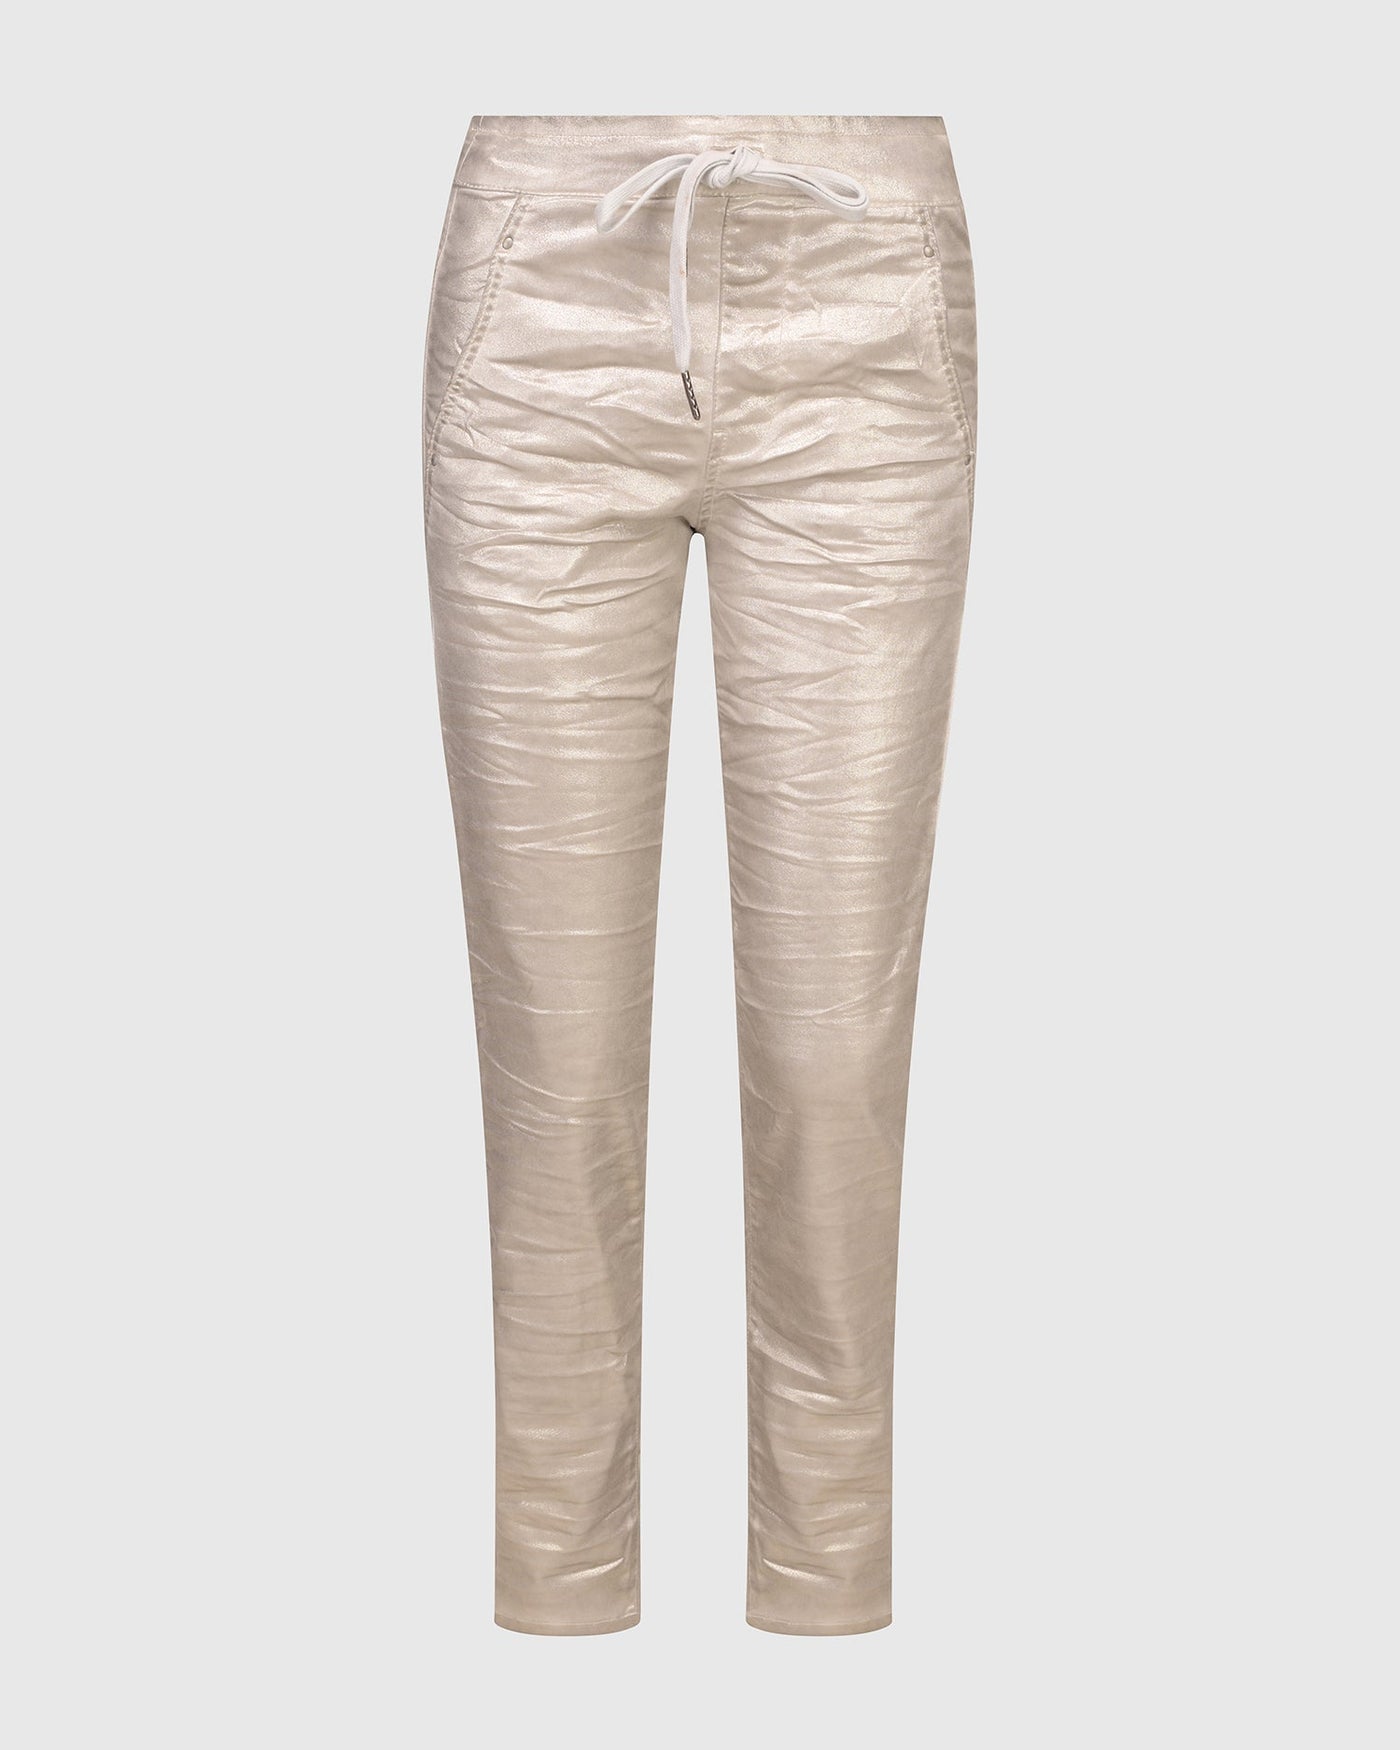 A woman's ultra-soft beige Iconic Stretch Jeans with zippers from ALEMBIKA with a Metallic Luster.